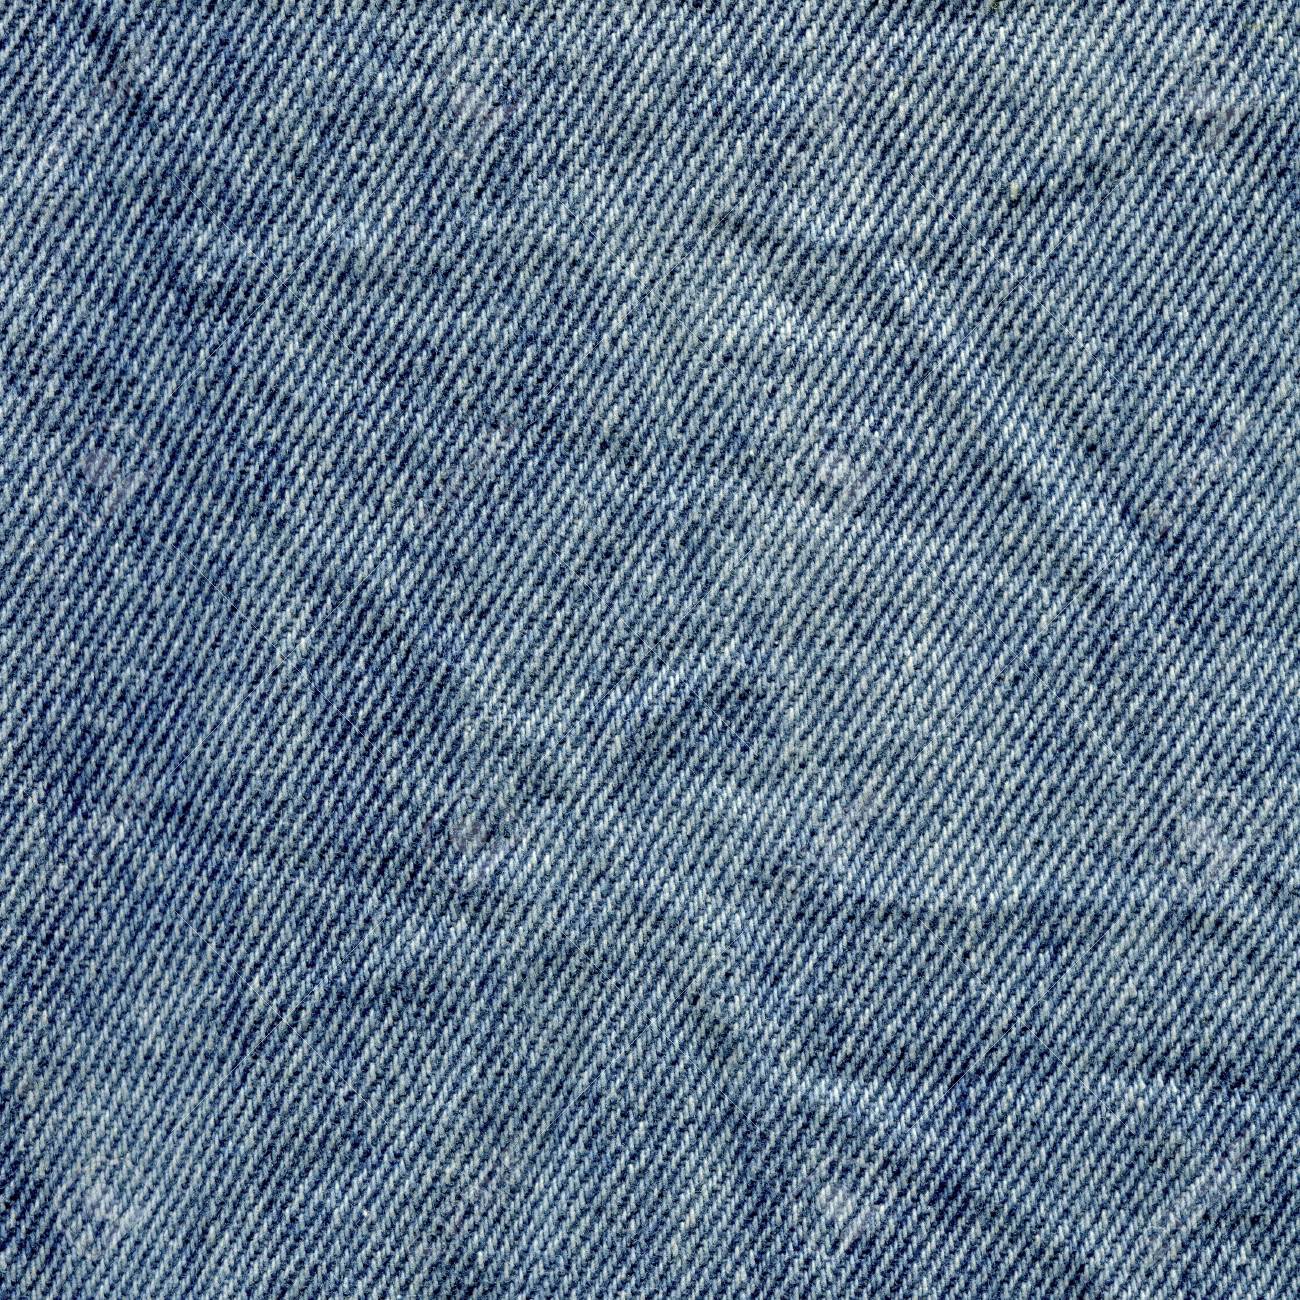 Blue Jean Texture Background Fabric Jeans Wallpaper Stock Photo